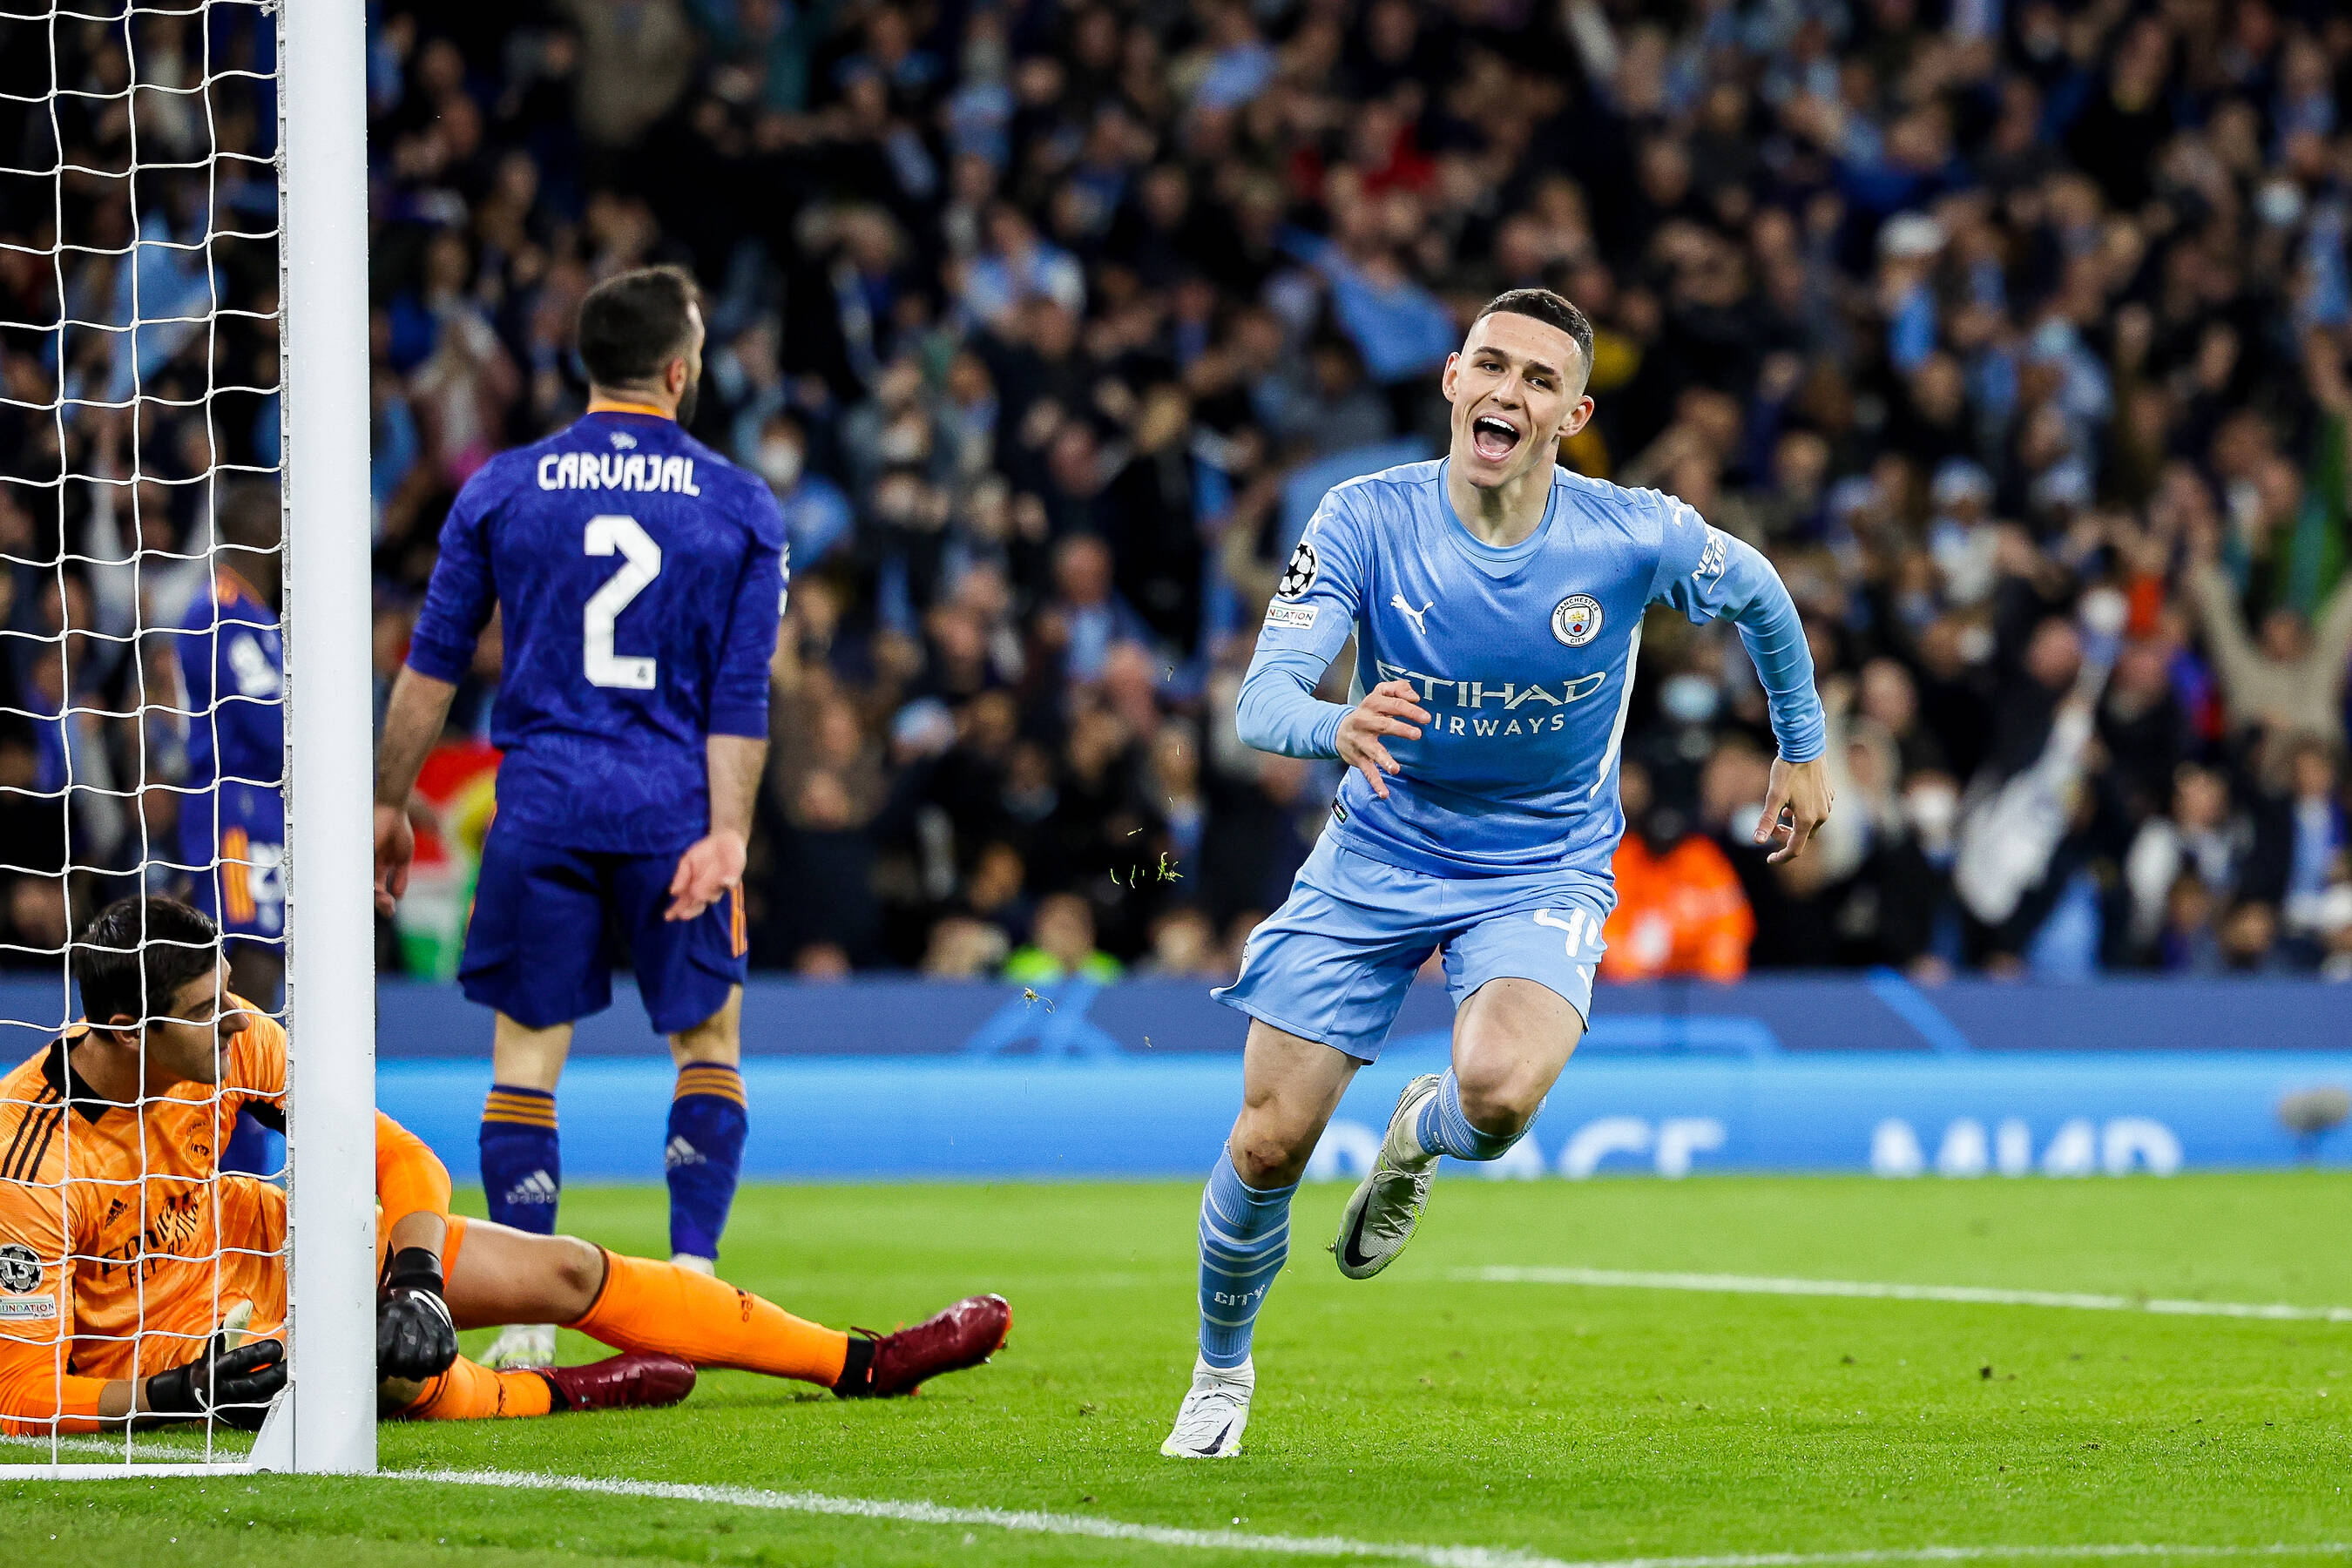 UEFA Champions League: Manchester City stun Real Madrid in thrilling semi-final classic